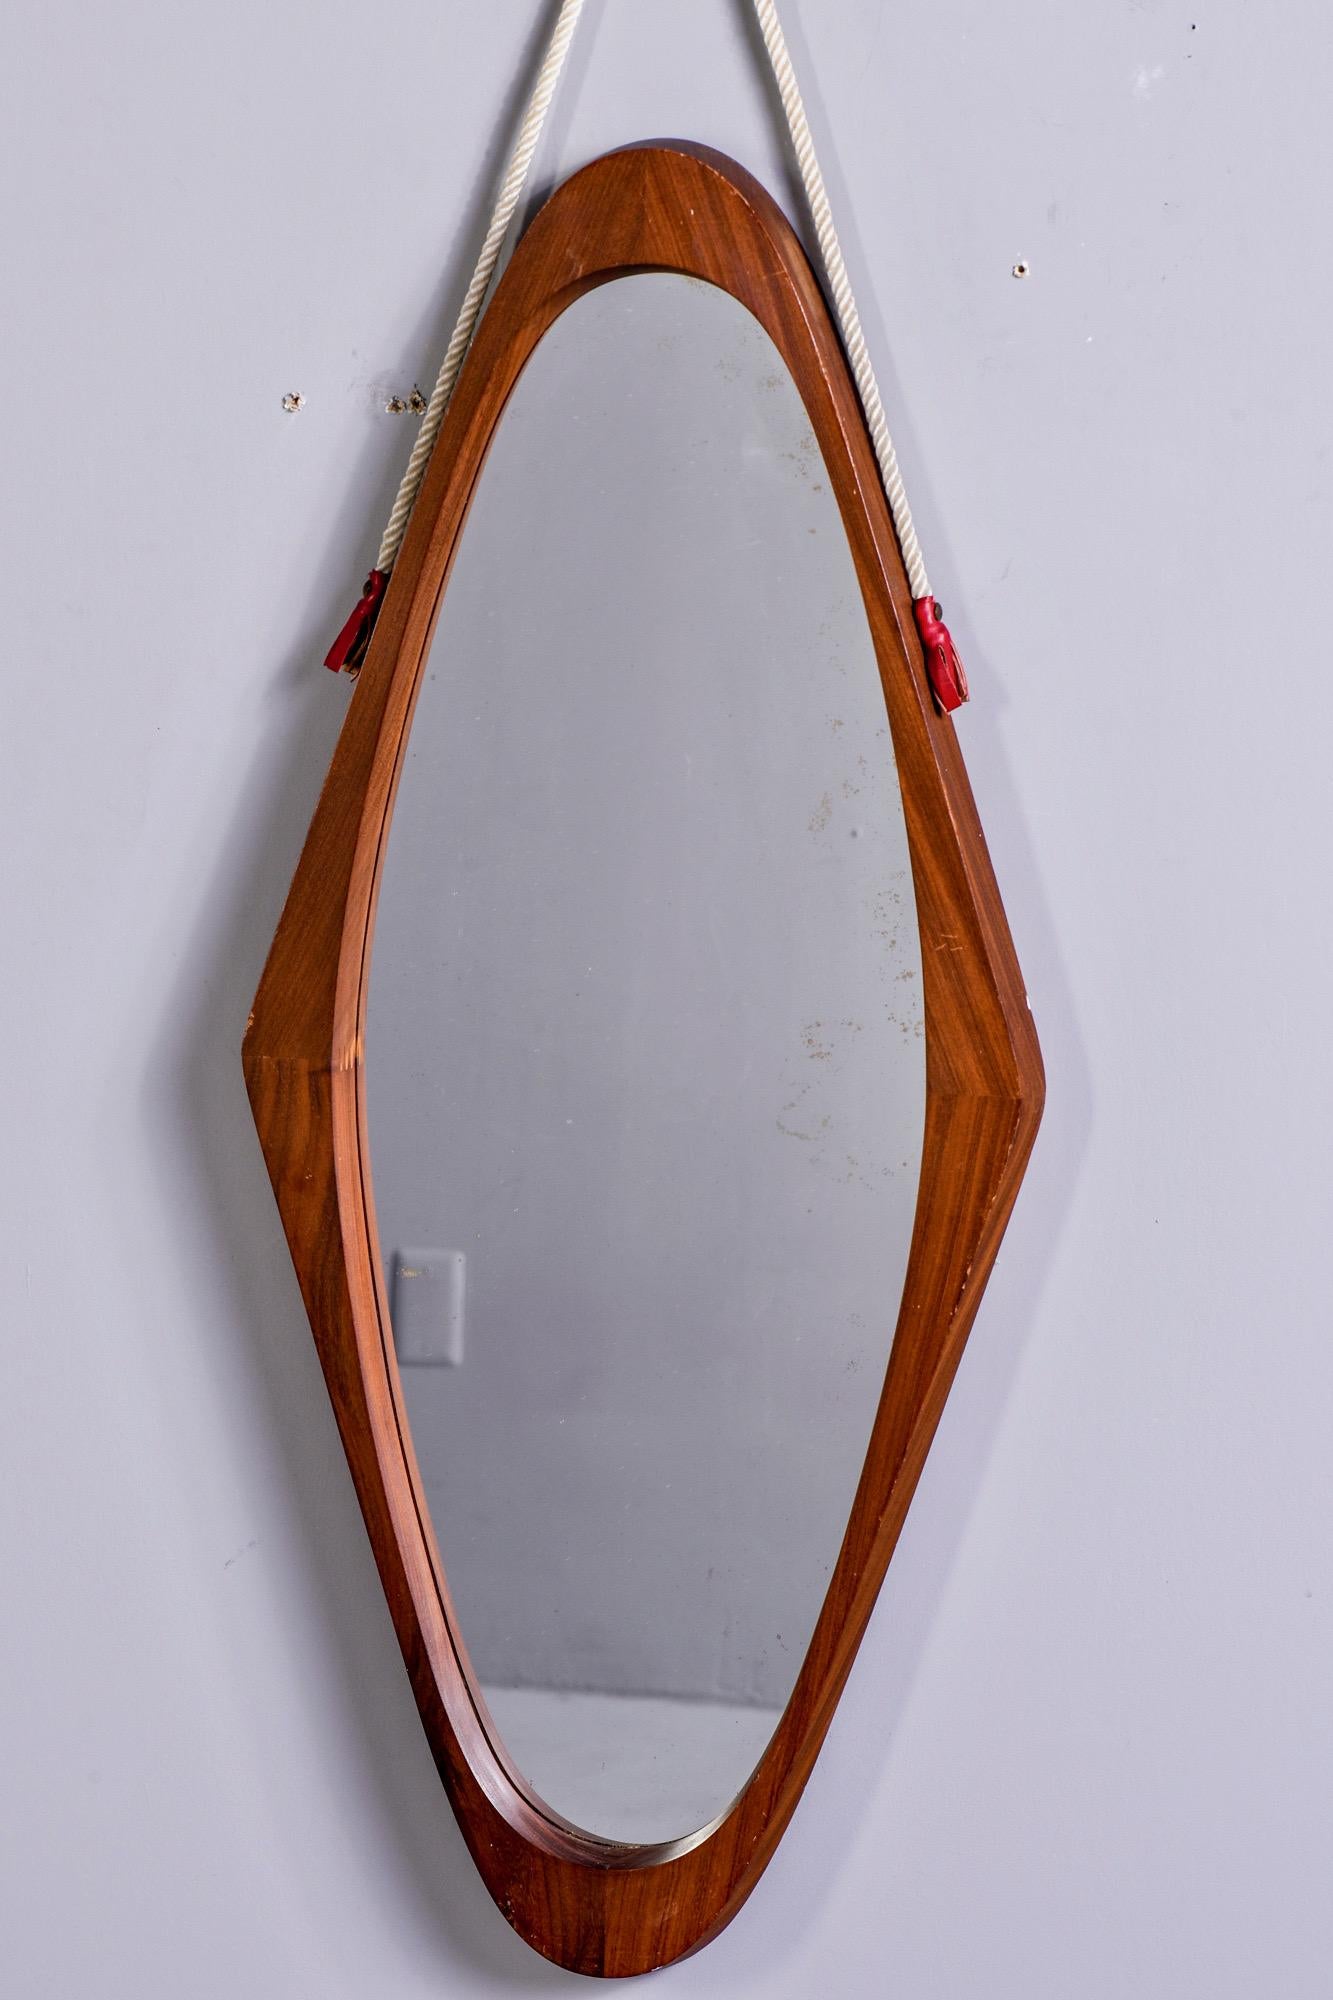 Circa 1970s Italian tall, narrow oval mirror with mahogany frame and rope hanger. Unknown maker.
Actual mirror size: 31” H x 11.5” W
Rope adds 8” to height when hanging.